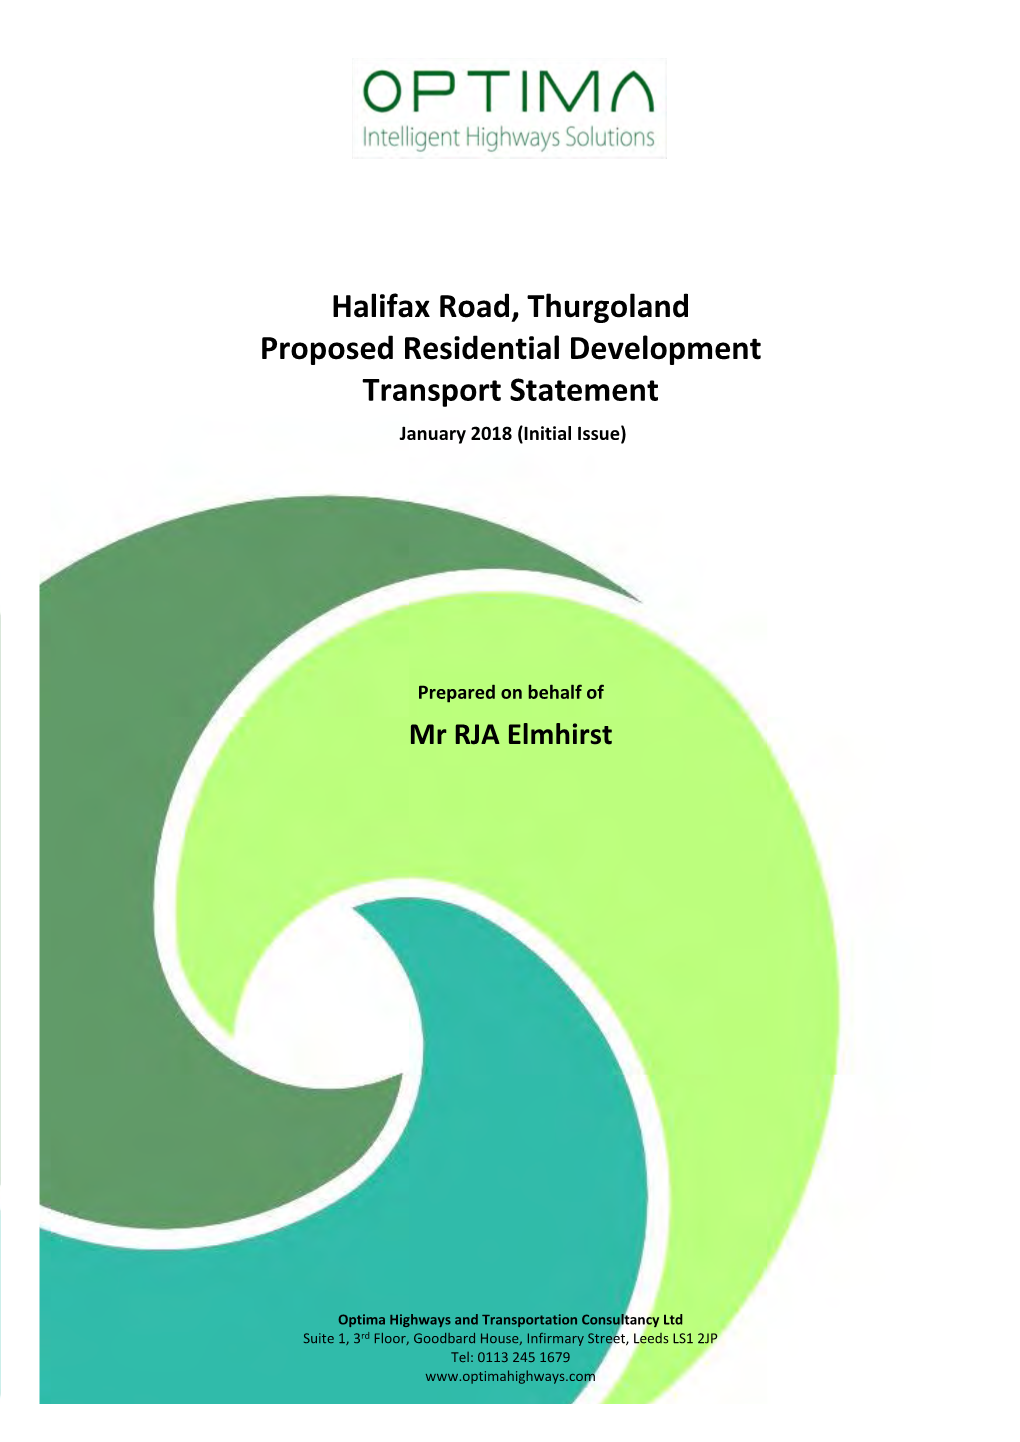 Halifax Road, Thurgoland Proposed Residential Development Transport Statement January 2018 (Initial Issue)